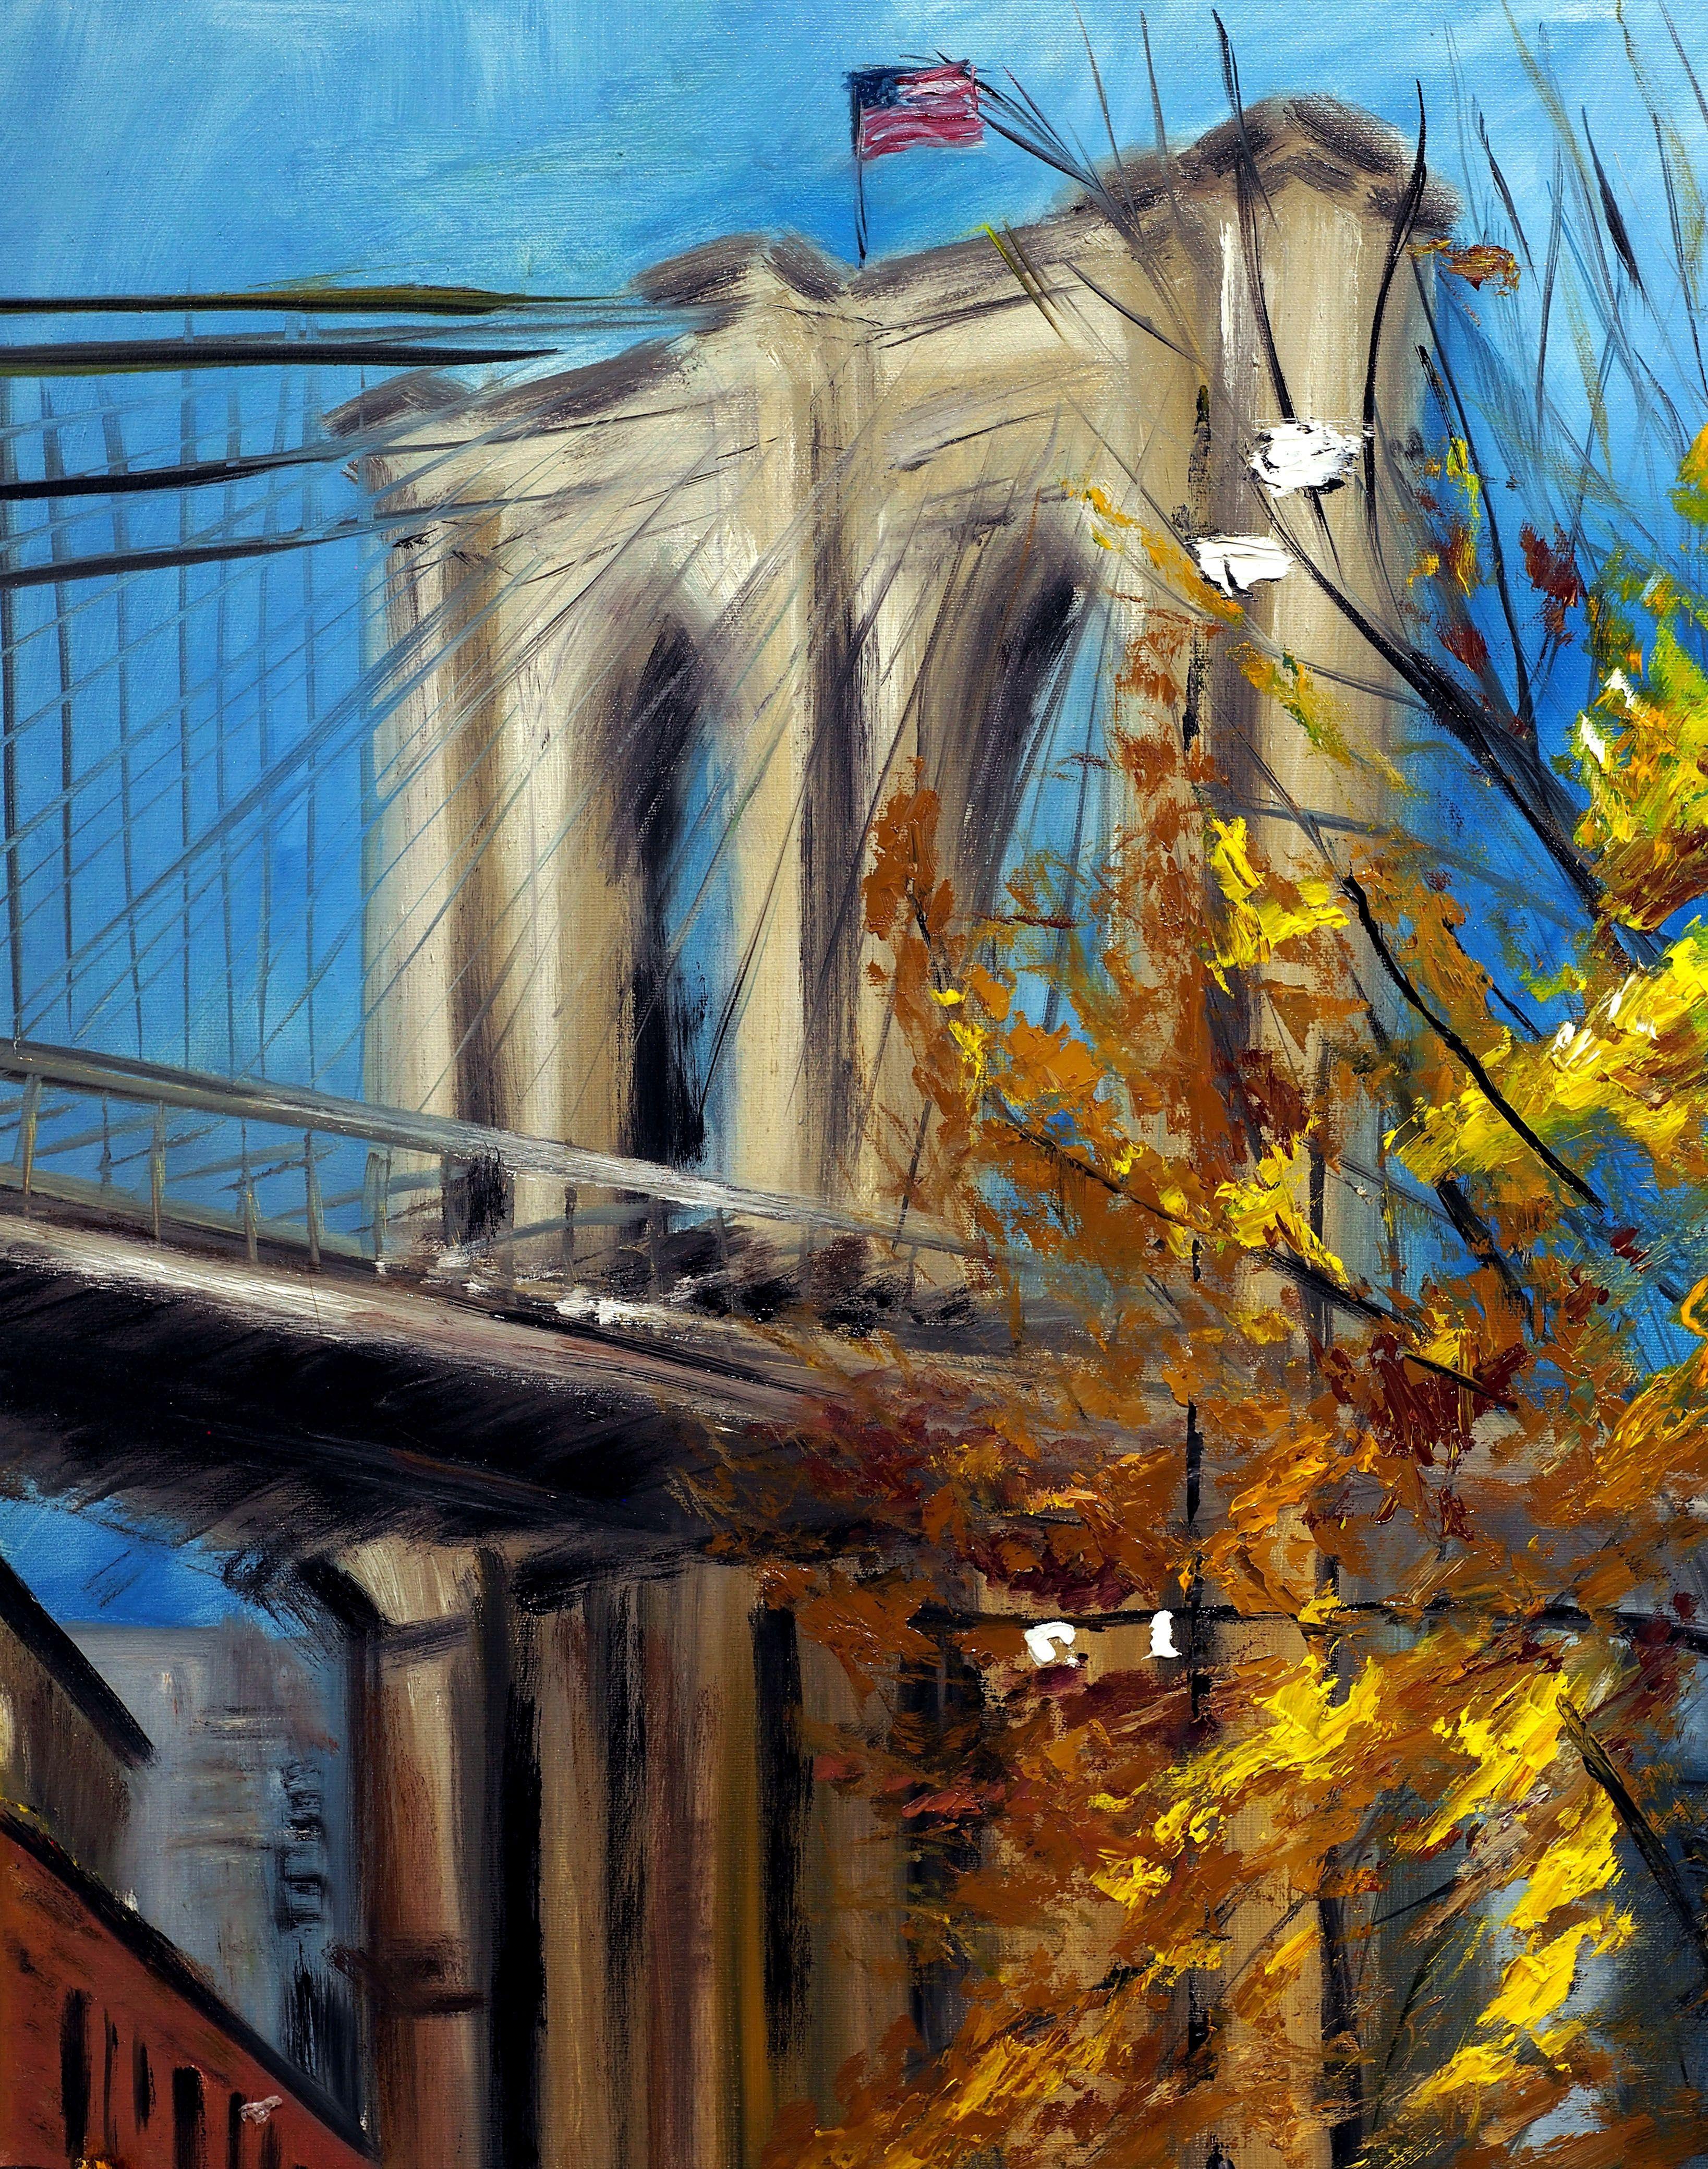 This one of a kind original painting shows the well known DUMBO neighbourhood in New York. Autumn illuminates the scene with golden leaves as we look at the Brooklyn Bridge in the distance. The artist uses special technique of palette knife painting